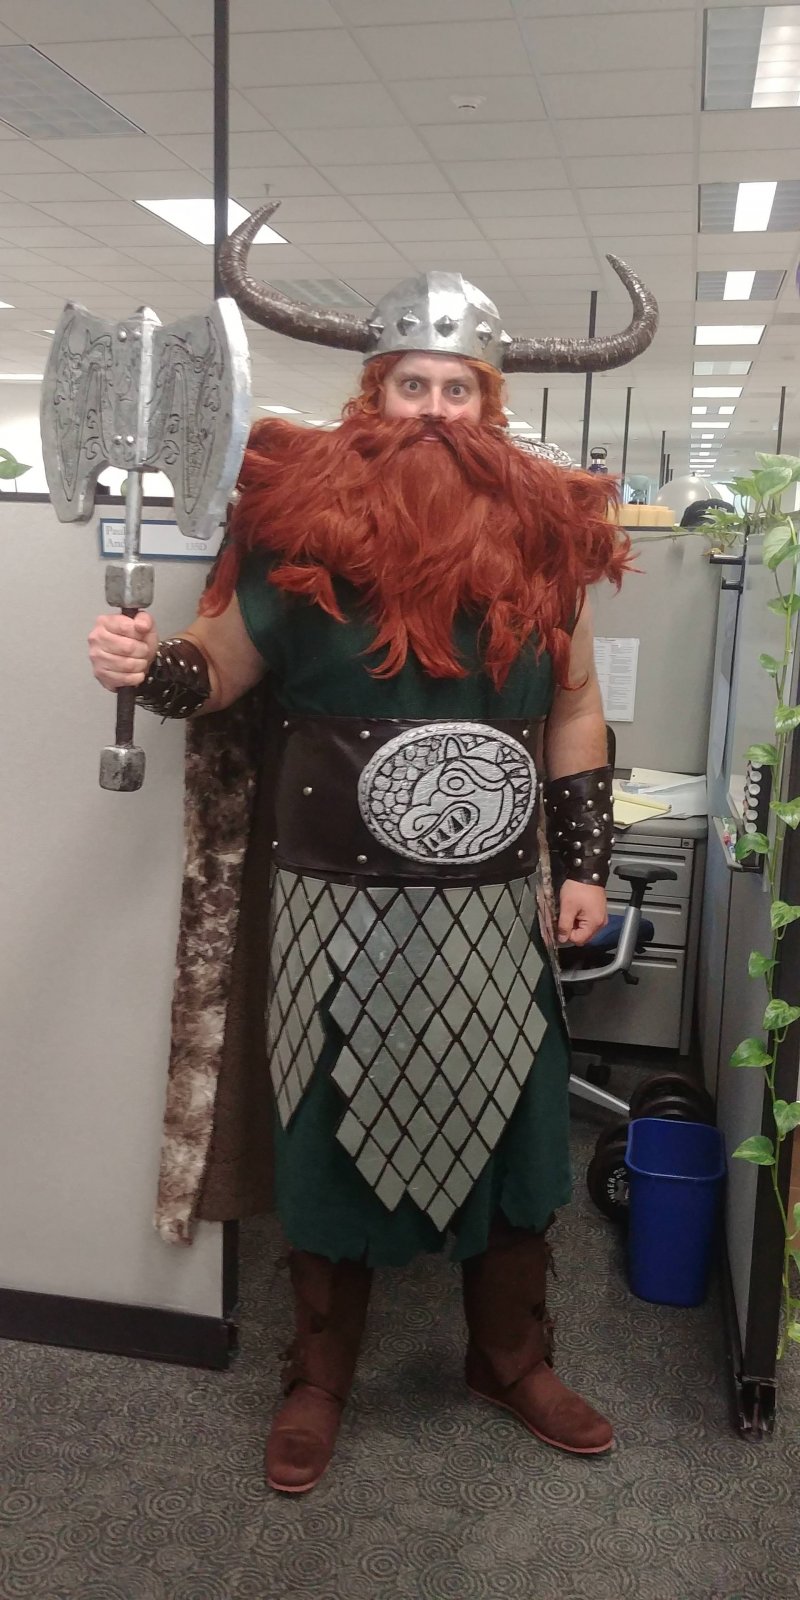 Office Viking does not wish to be disturbed.